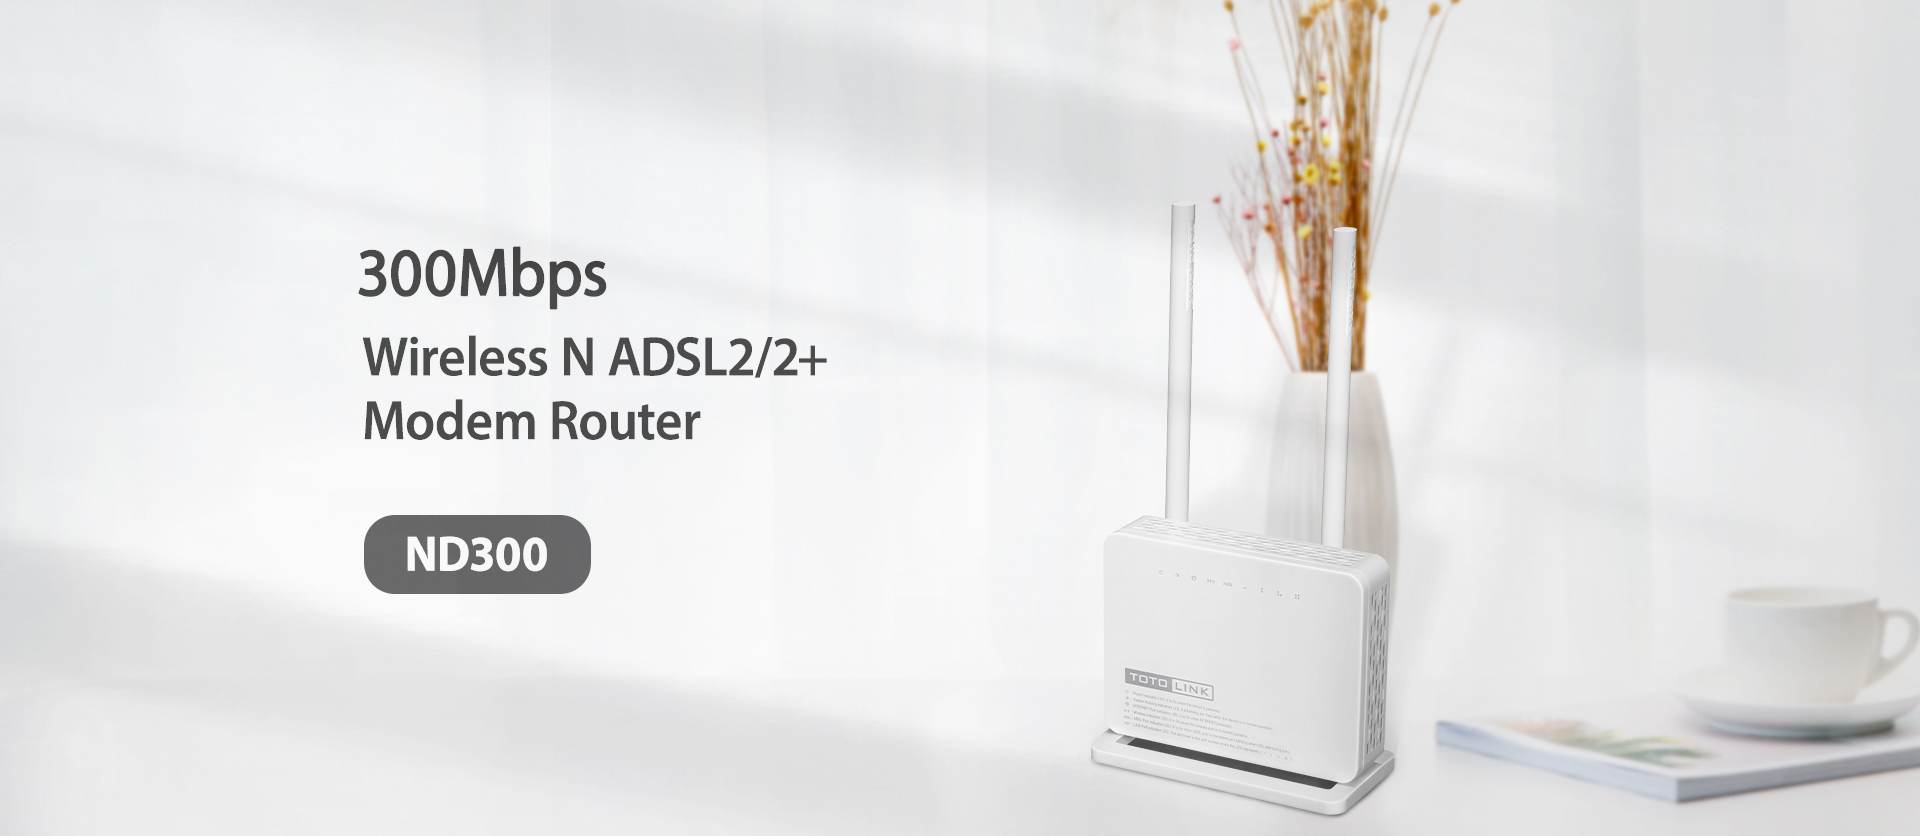  300Mbps Wireless N ADSL2/2+ Modem Router 